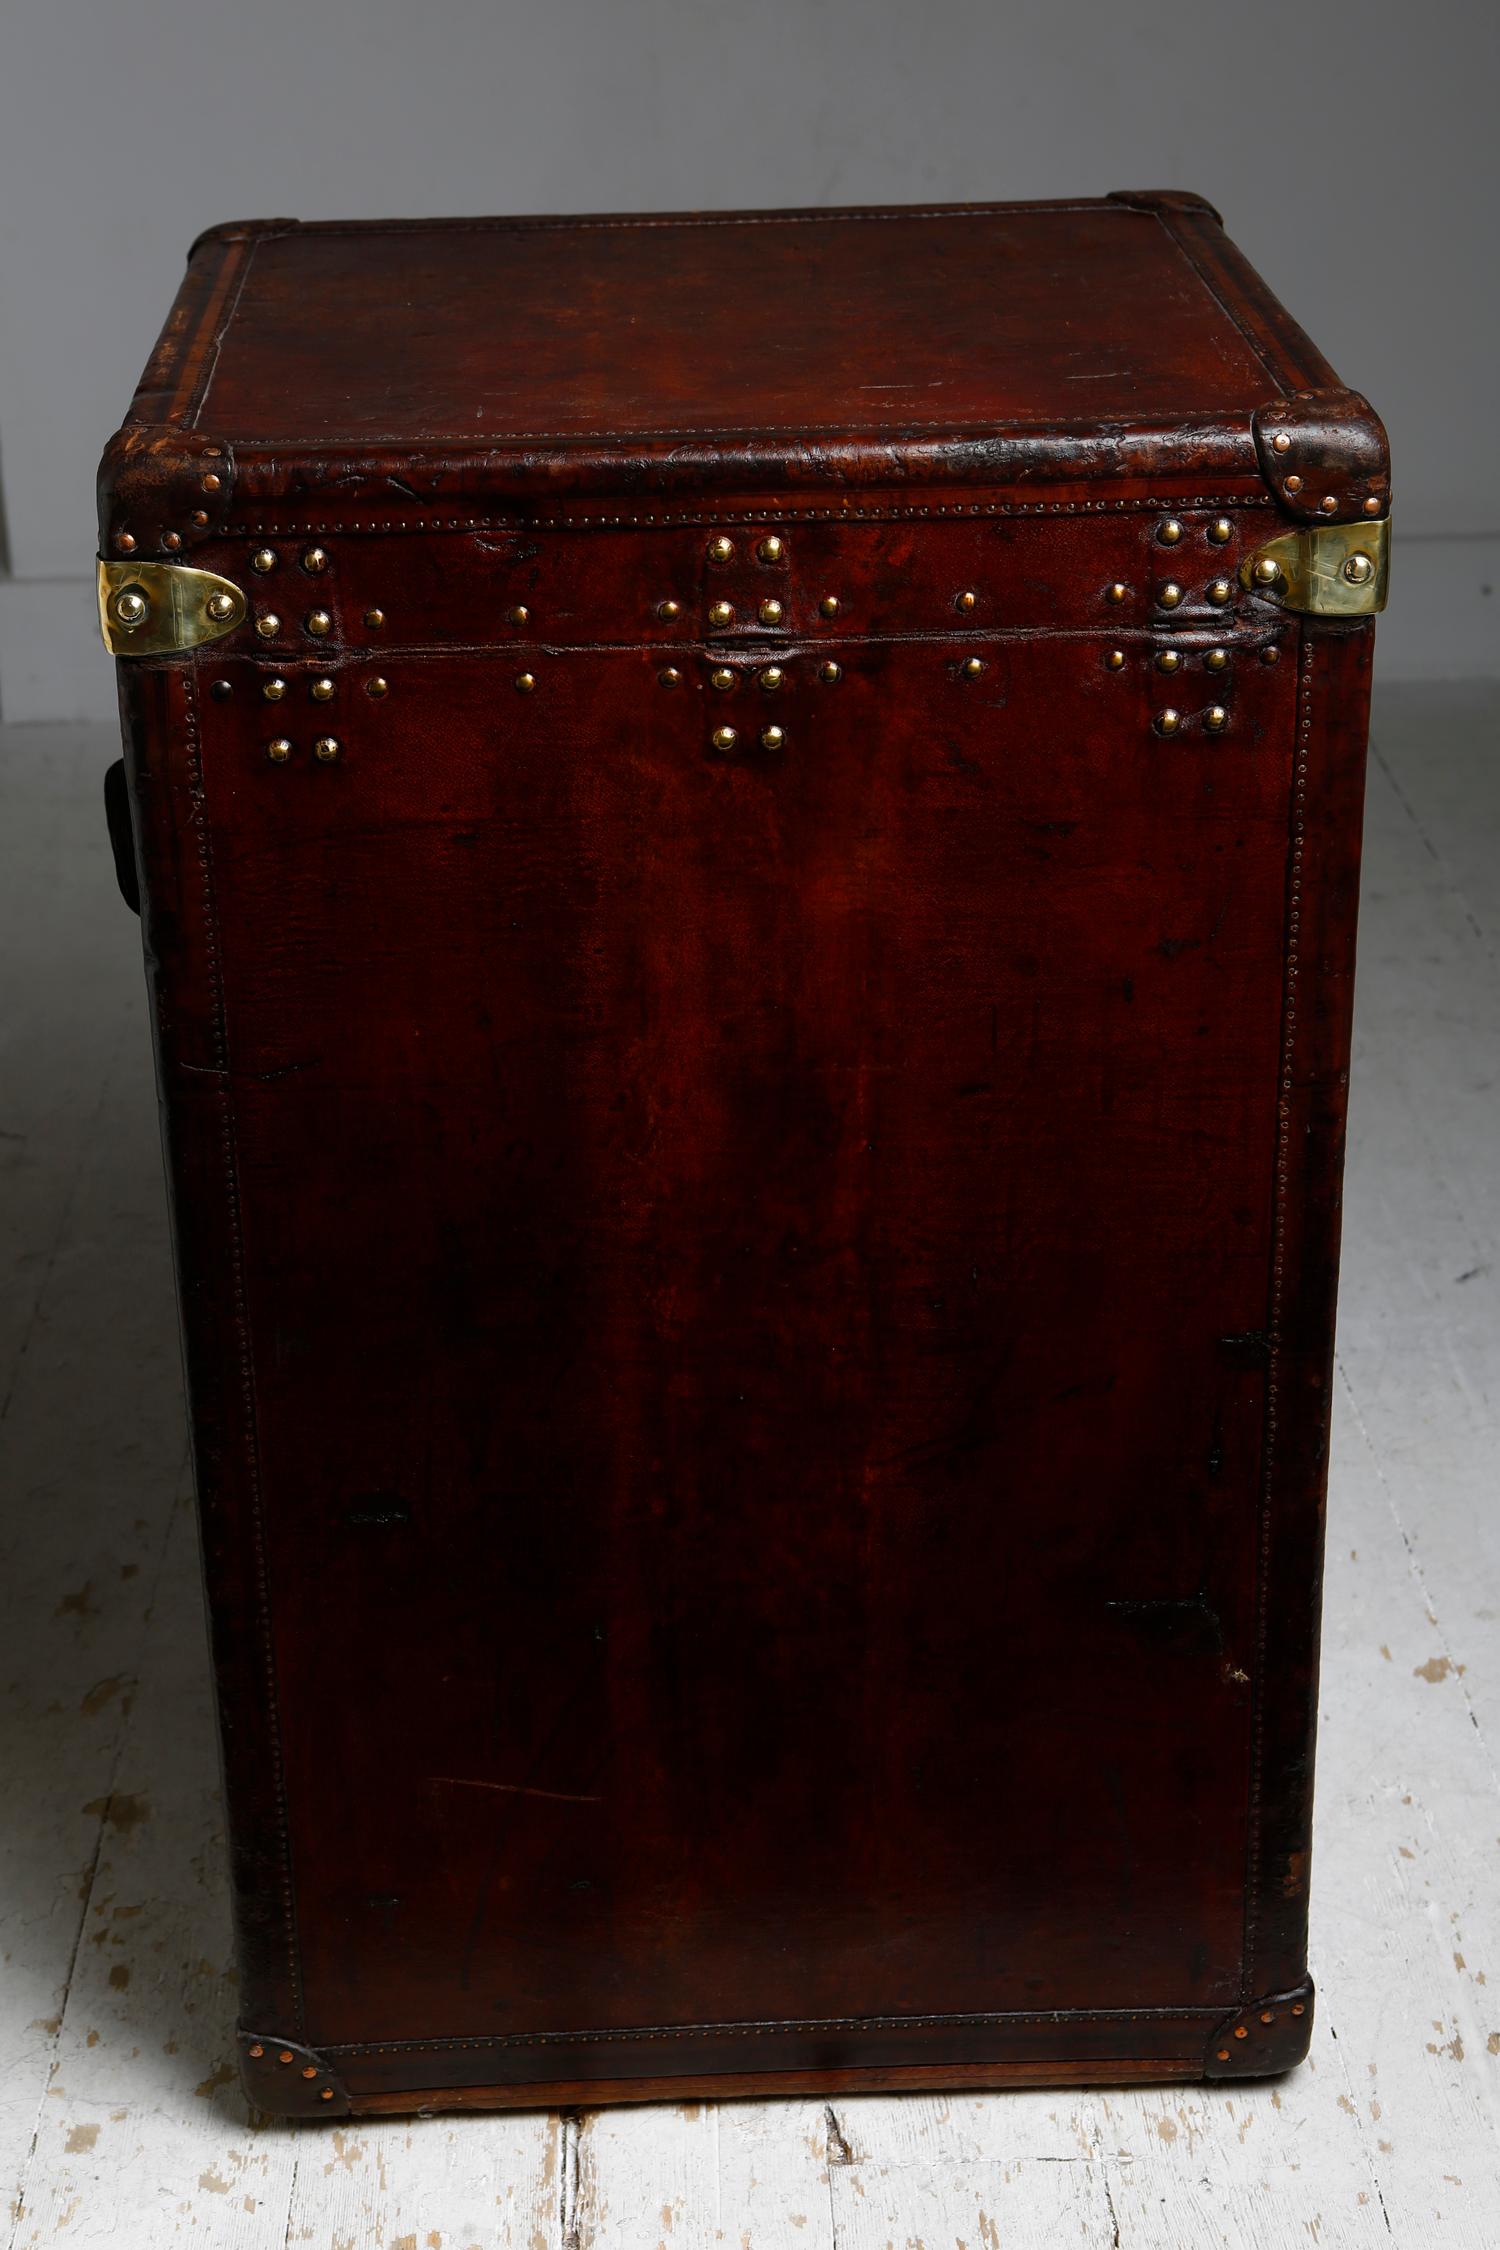 Early 20th Century Louis Vuitton Ladies Lingerie Desk Trunk in Orange with Mahogany Finish, 1914 For Sale